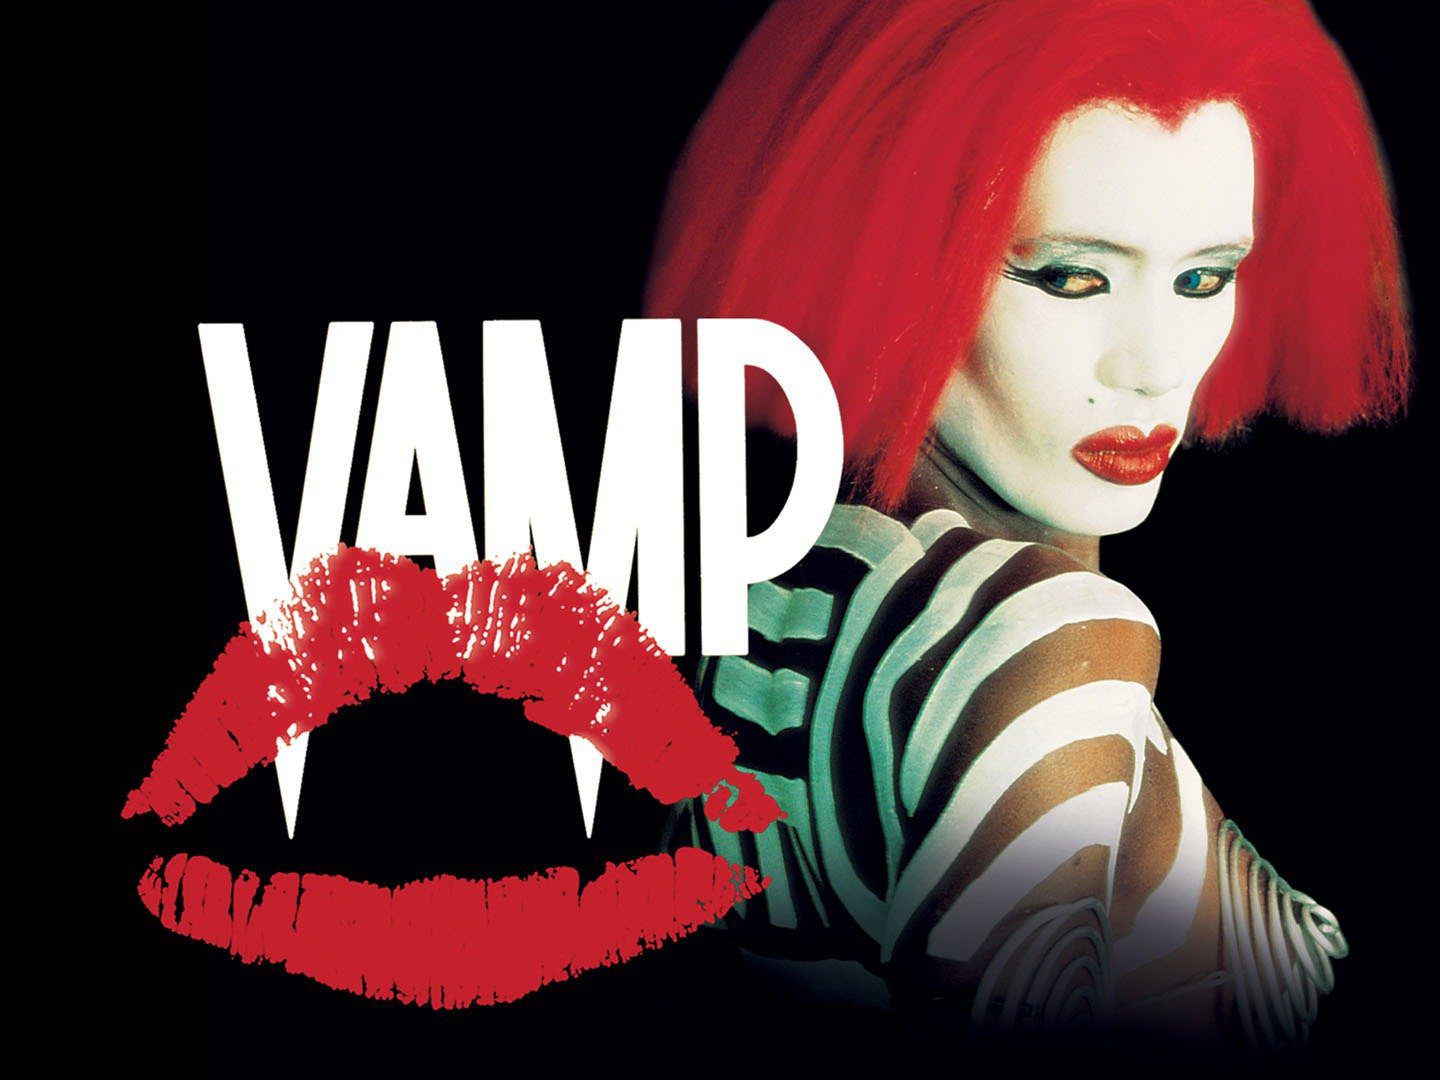 Vamp Vampire movie from the 80s reviewed in 2023